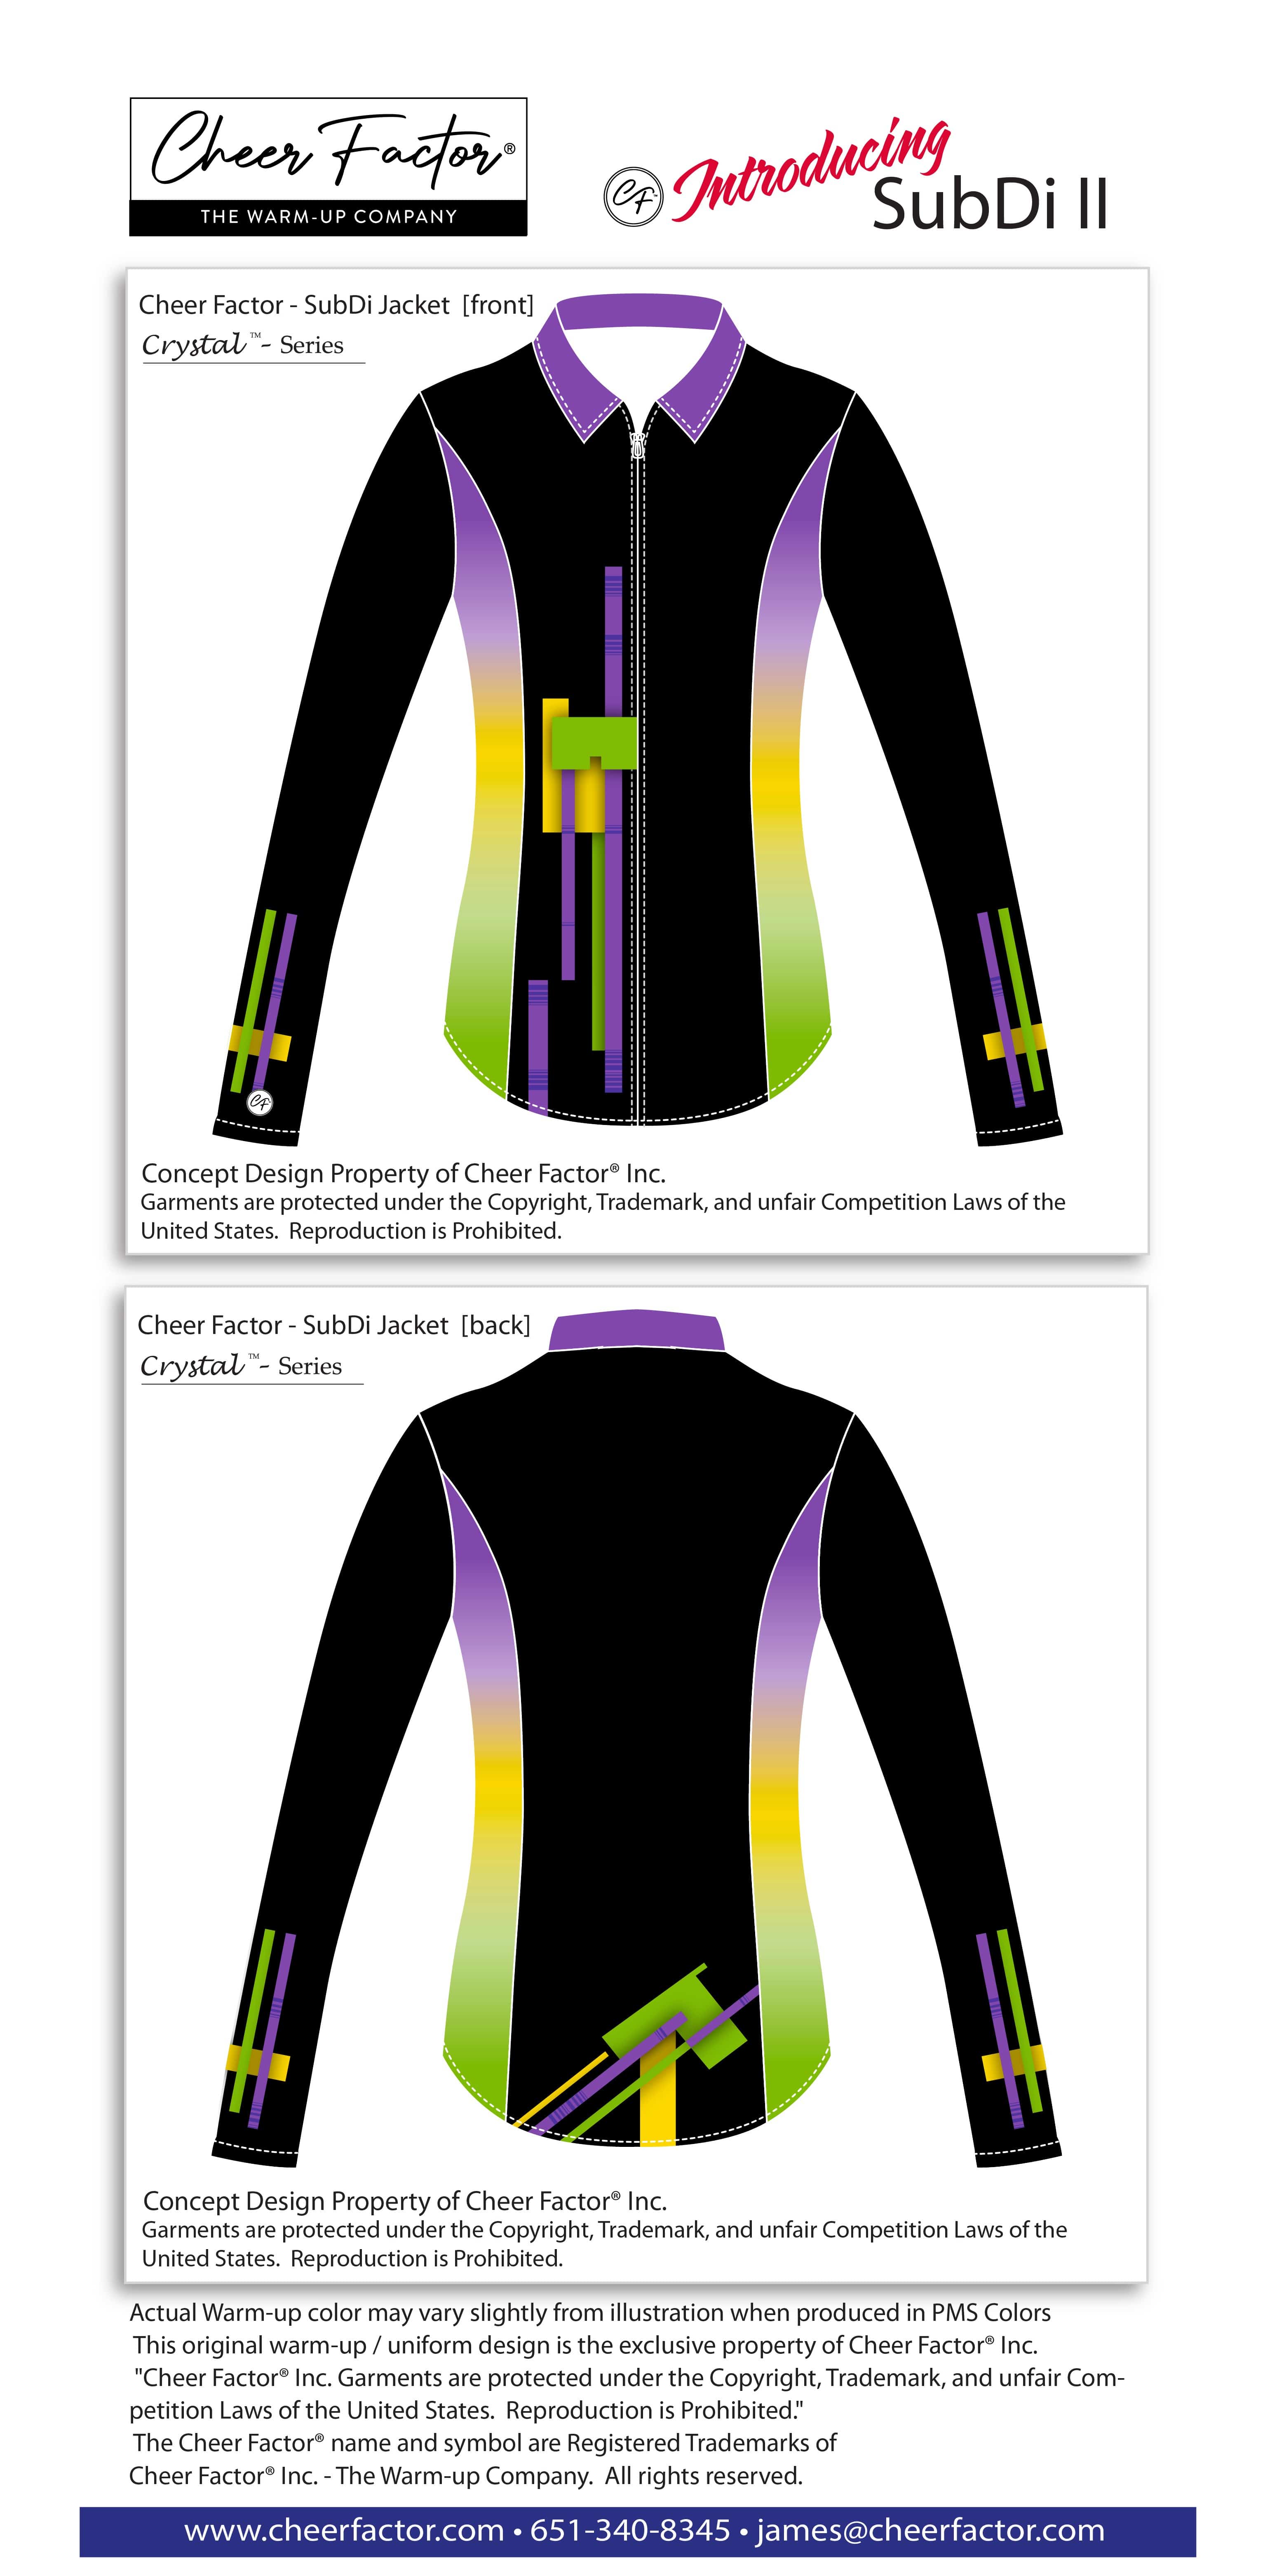 a unique modern design with ombre jacket side inserts. Overall black with purple, lime green and yellow graphics. Perfect for Dance or Gymnastics teams